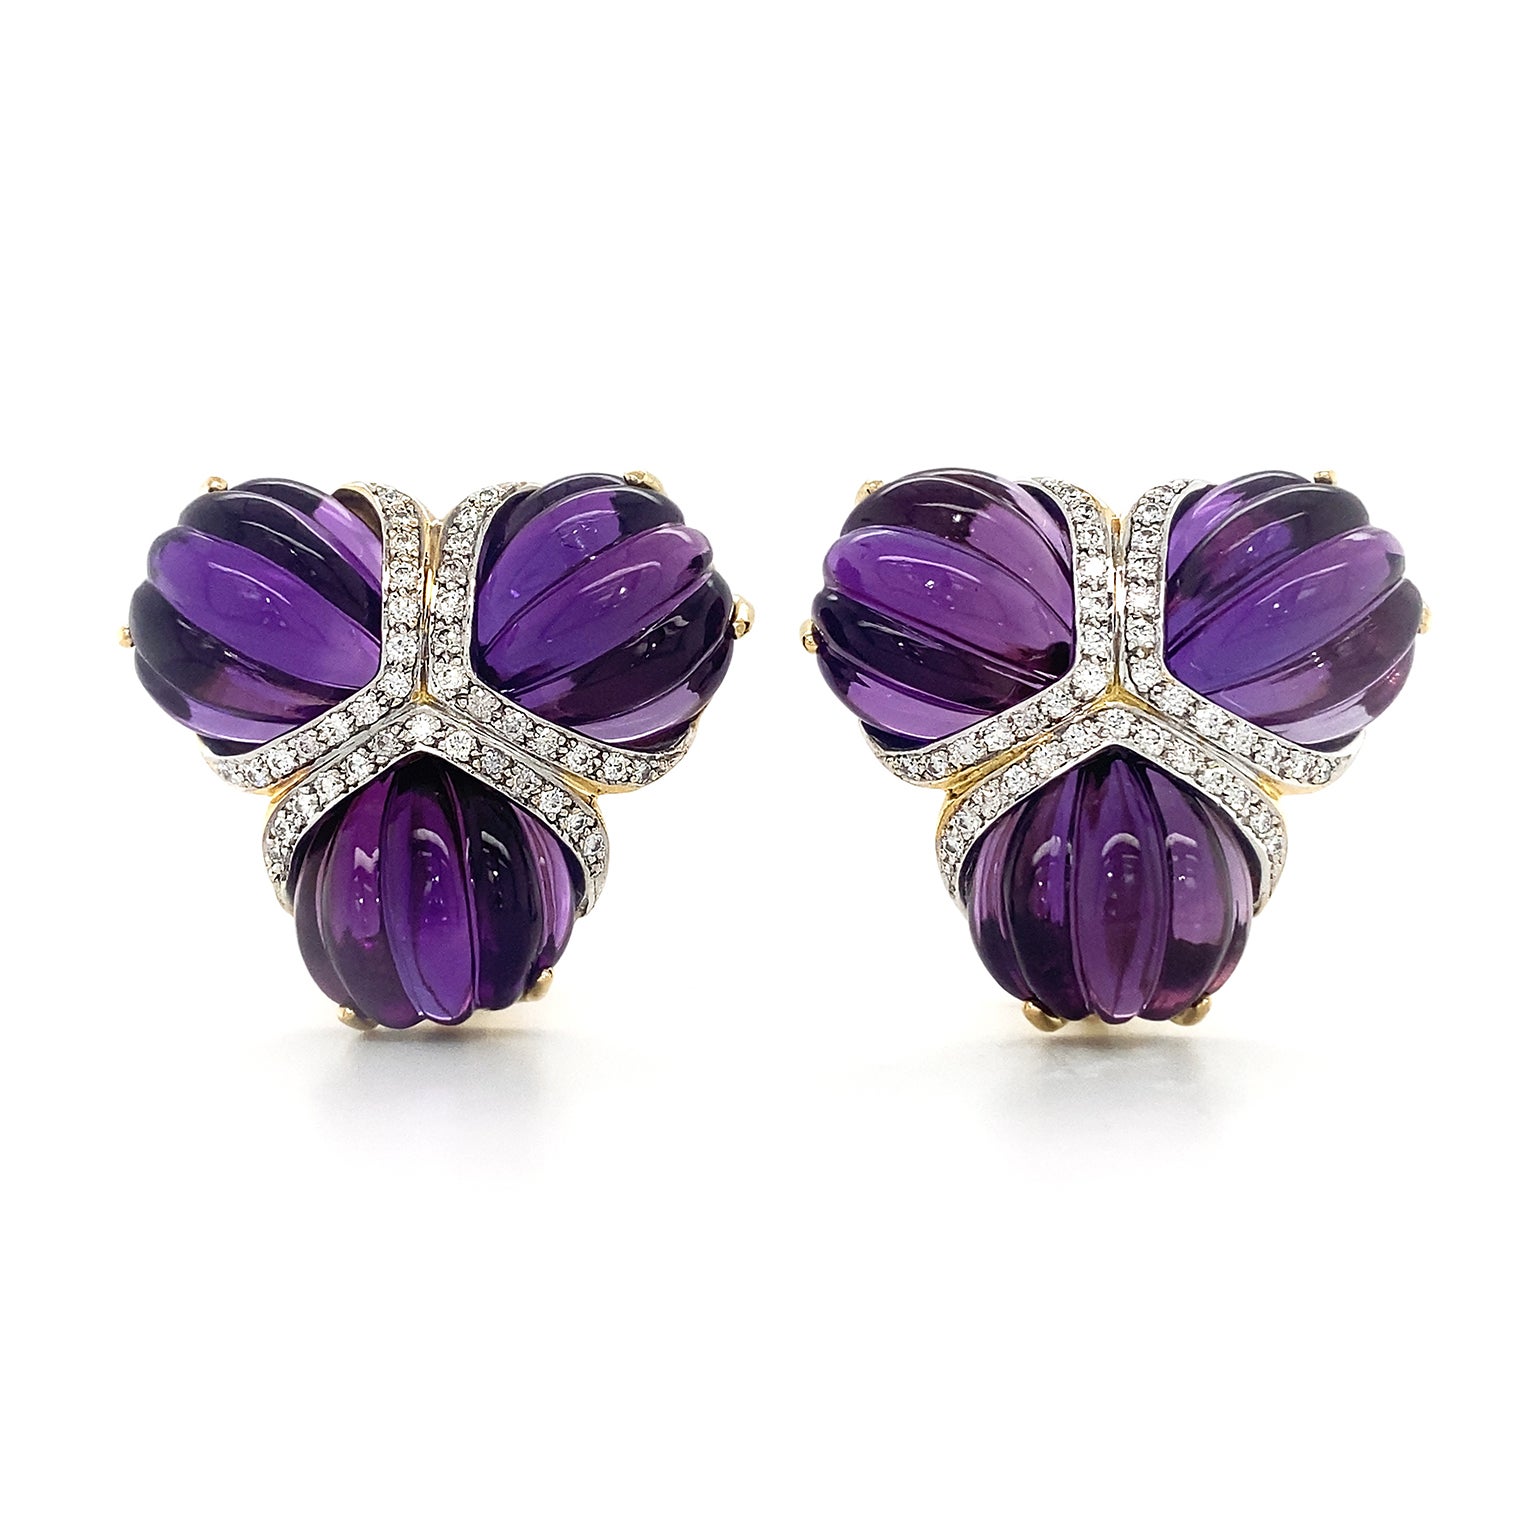 Grandeur is the result of pairing amethyst and diamonds. Intense violet and soft lilac hues of amethyst are heightened by their carved fan shapes. Three fans are joined together by their tapered tips, which are trimmed with a triangular arrangement